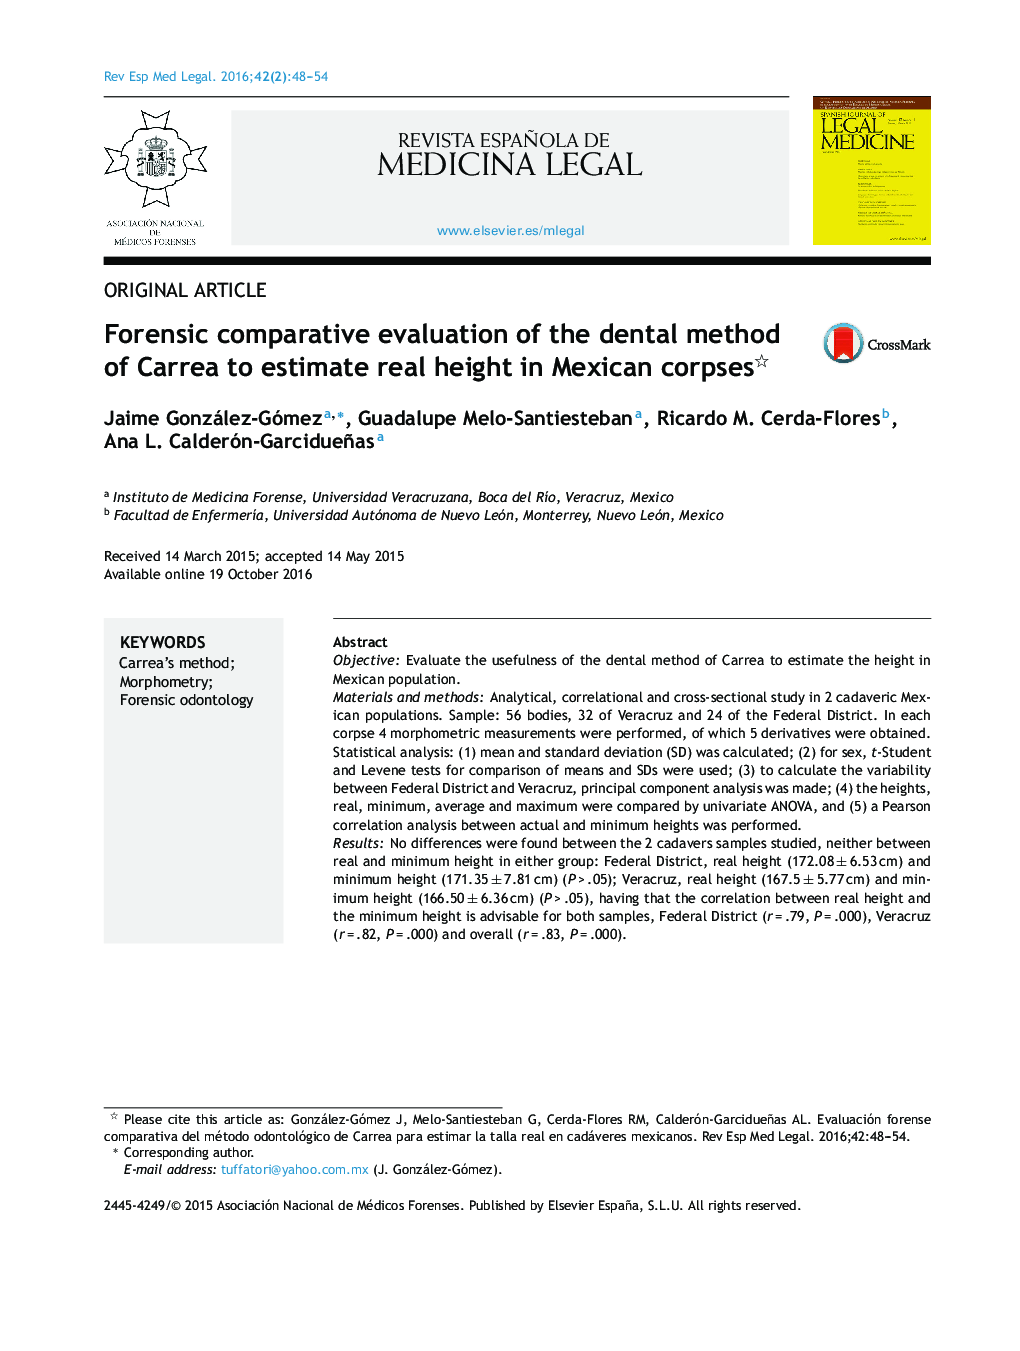 Forensic comparative evaluation of the dental method of Carrea to estimate real height in Mexican corpses